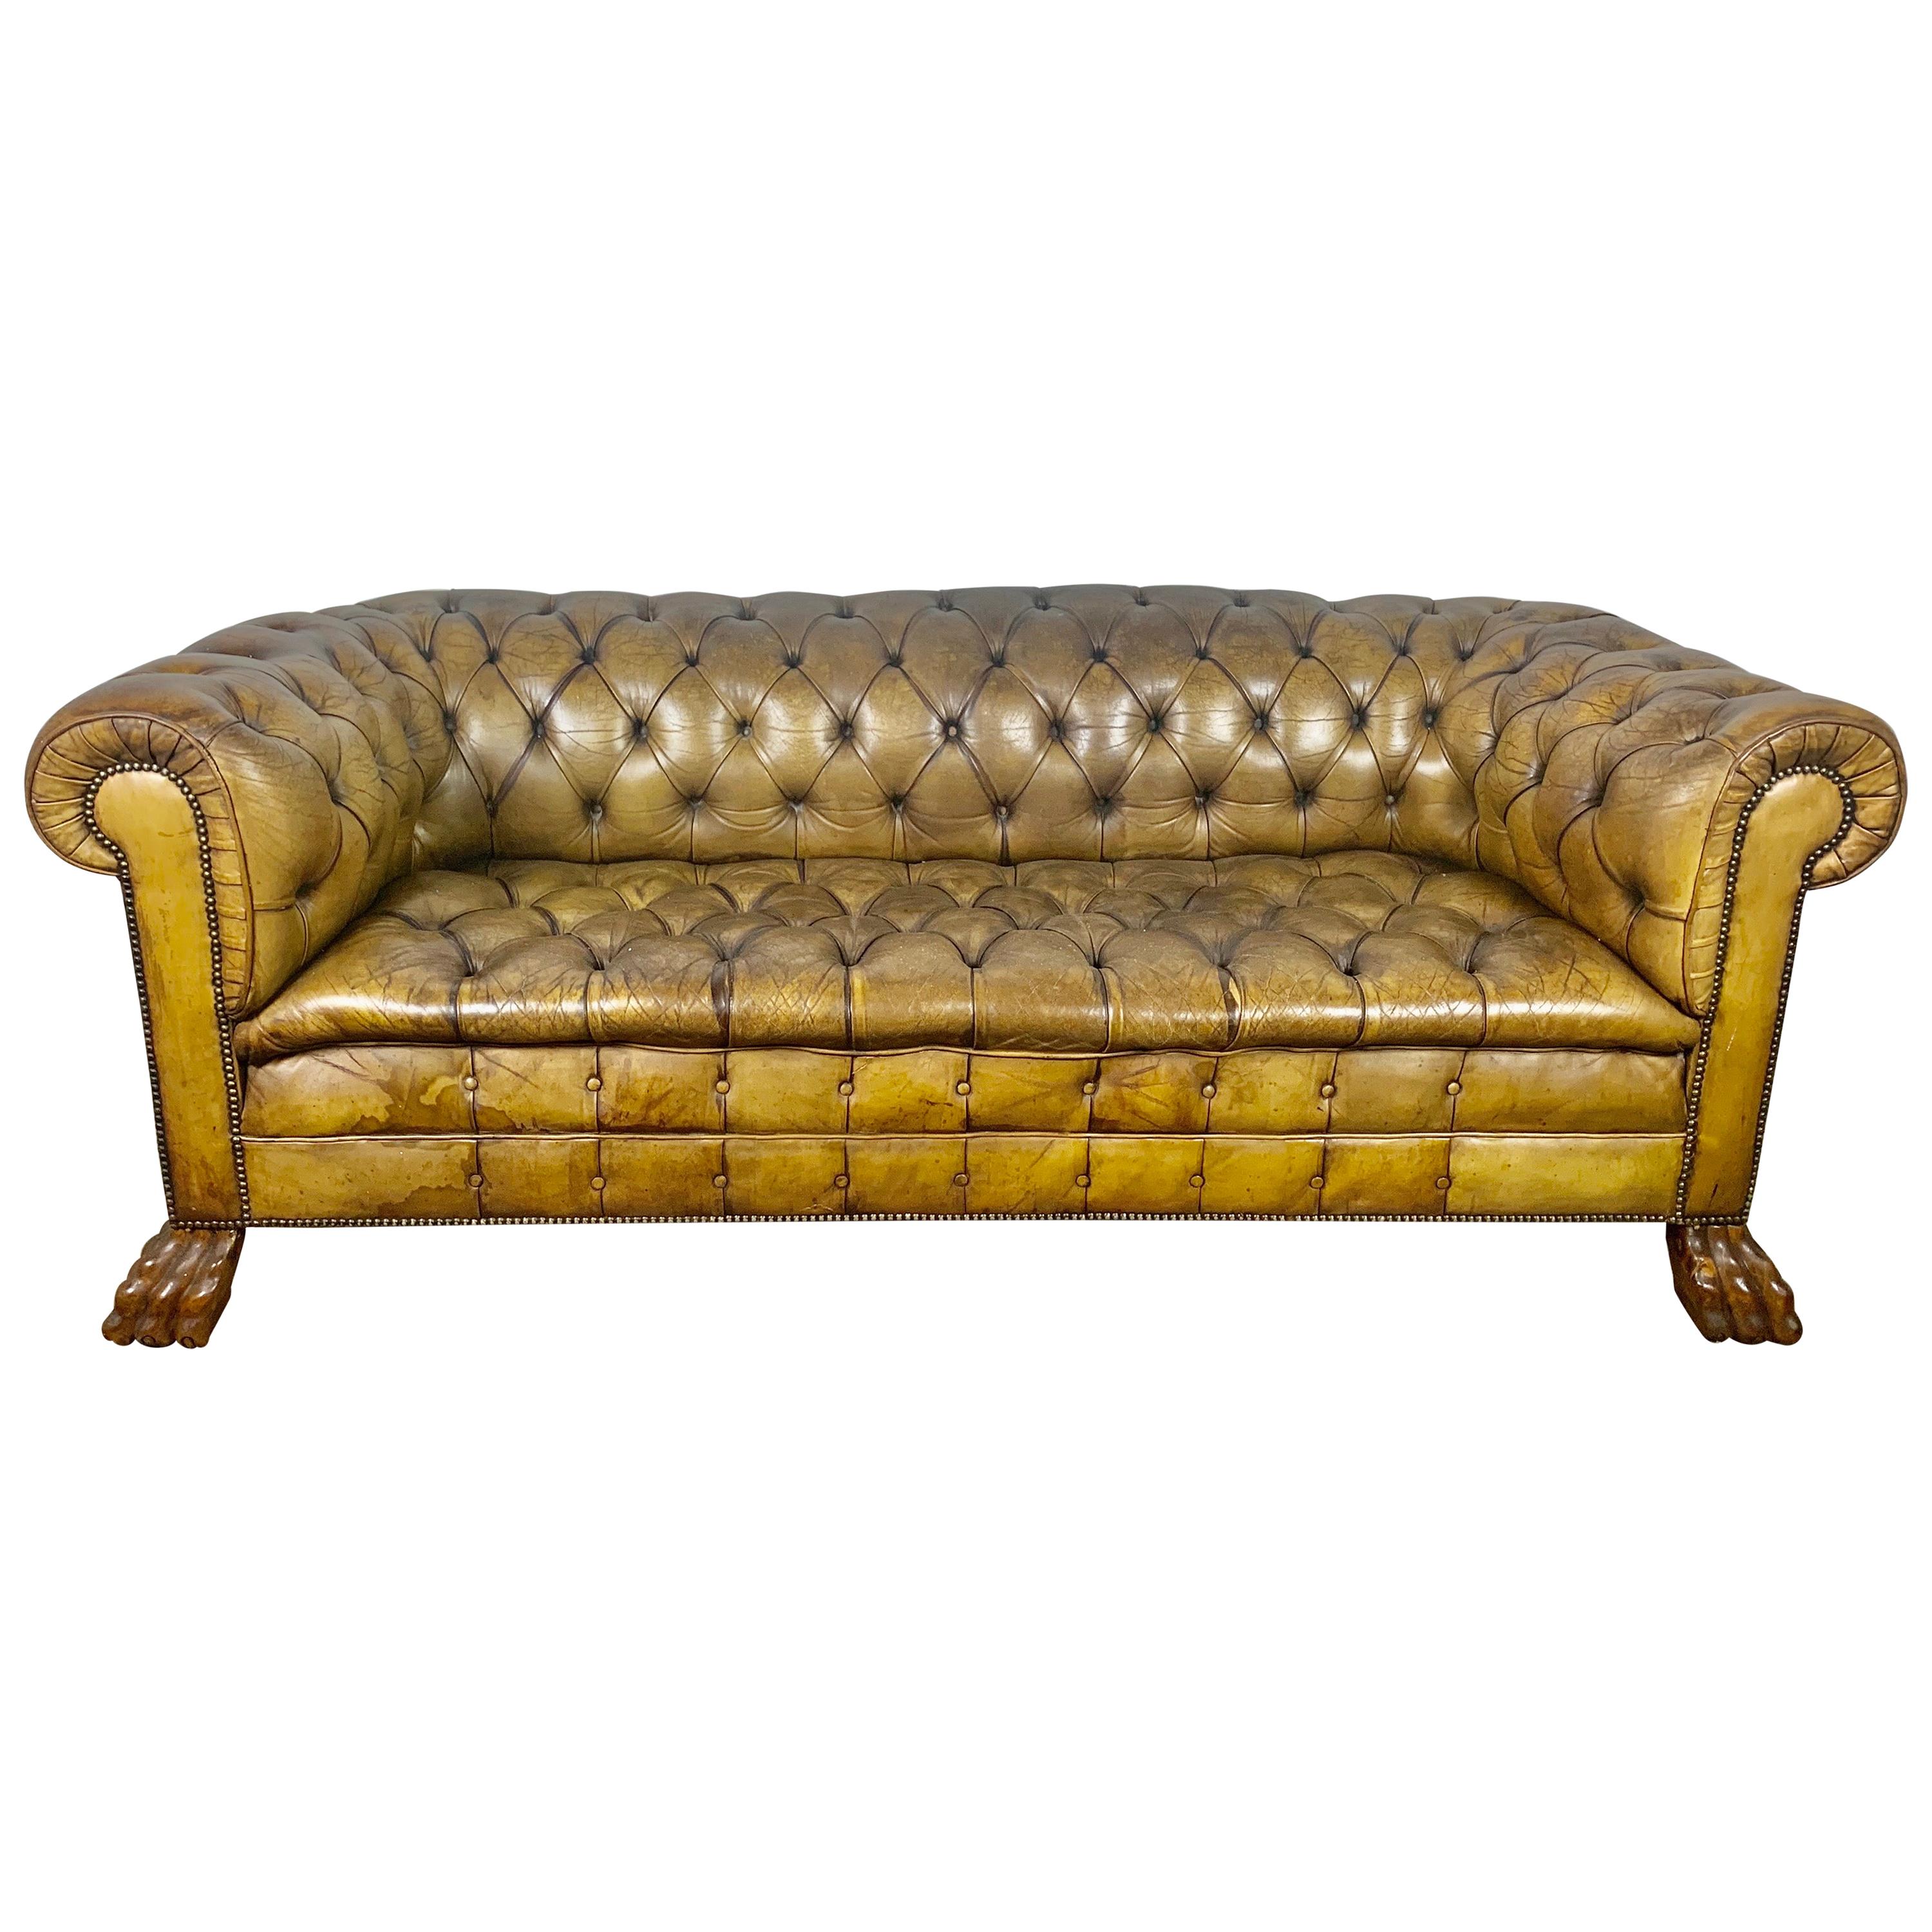 English Leather Tufted Chesterfield Sofa, circa 1900s